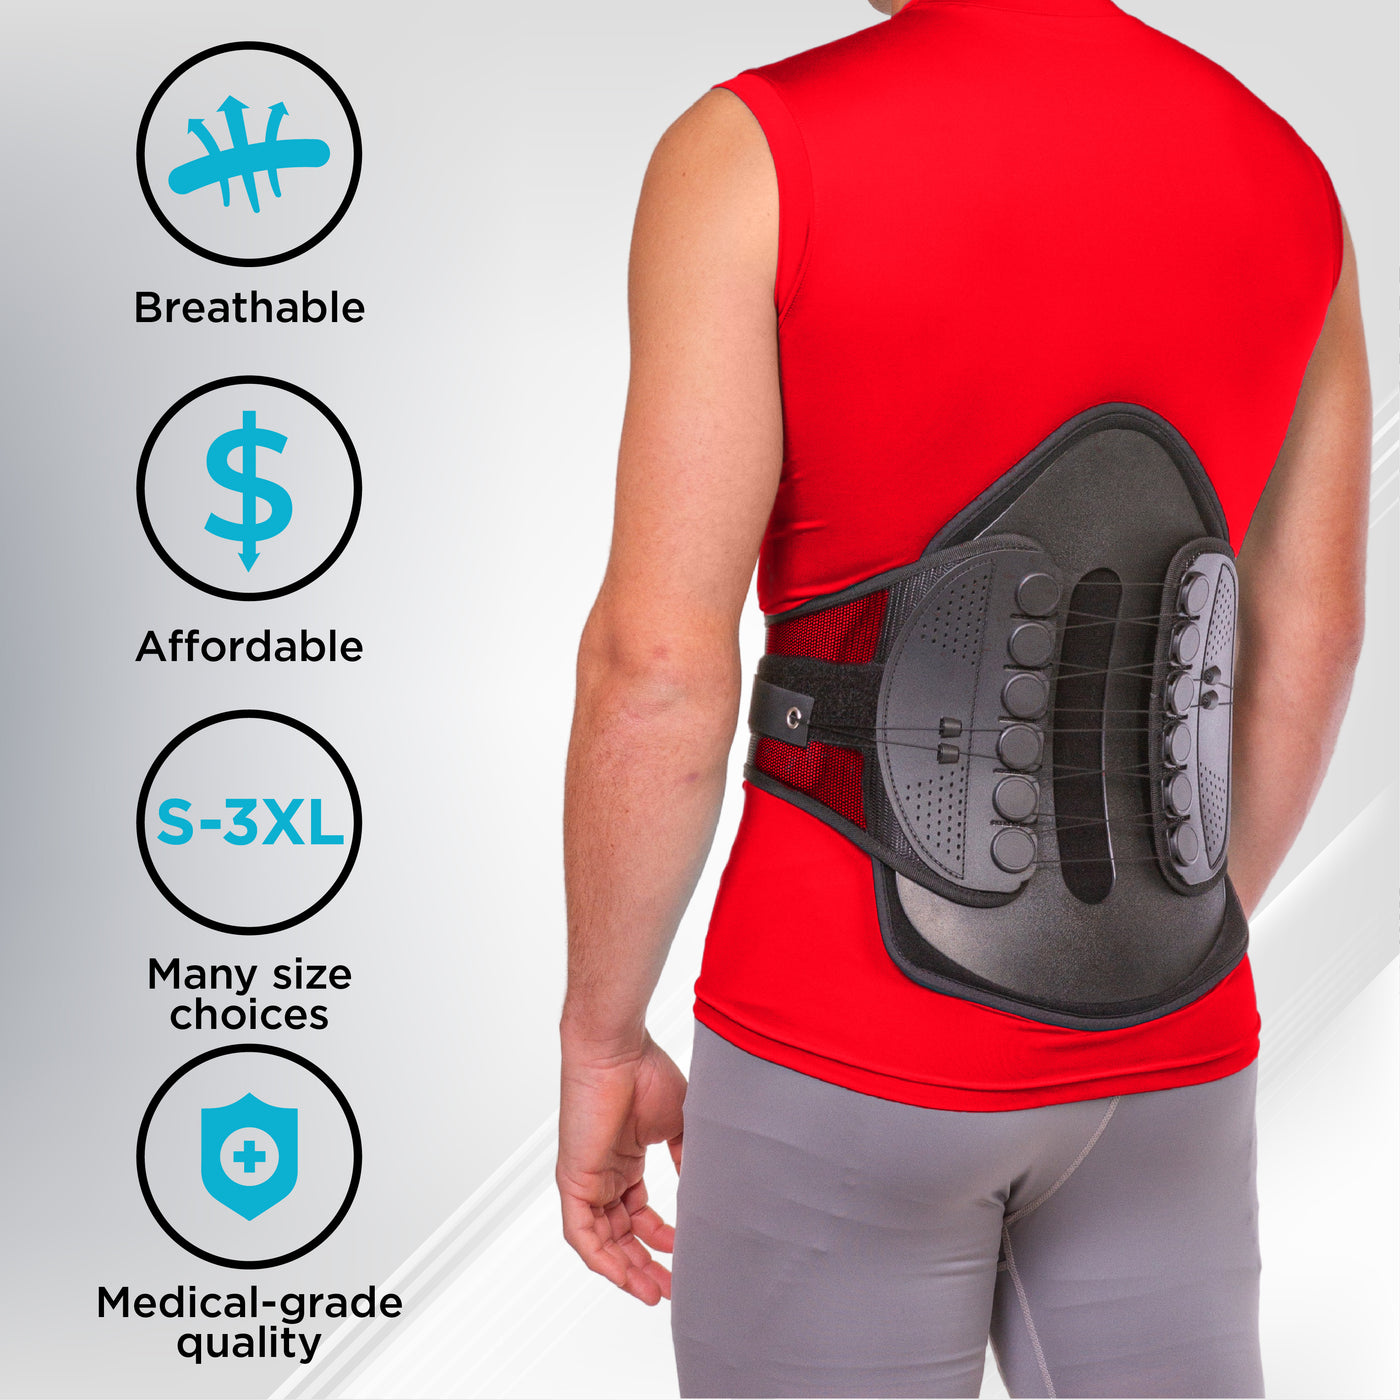 the plus size decompression back brace is comes in many sizes